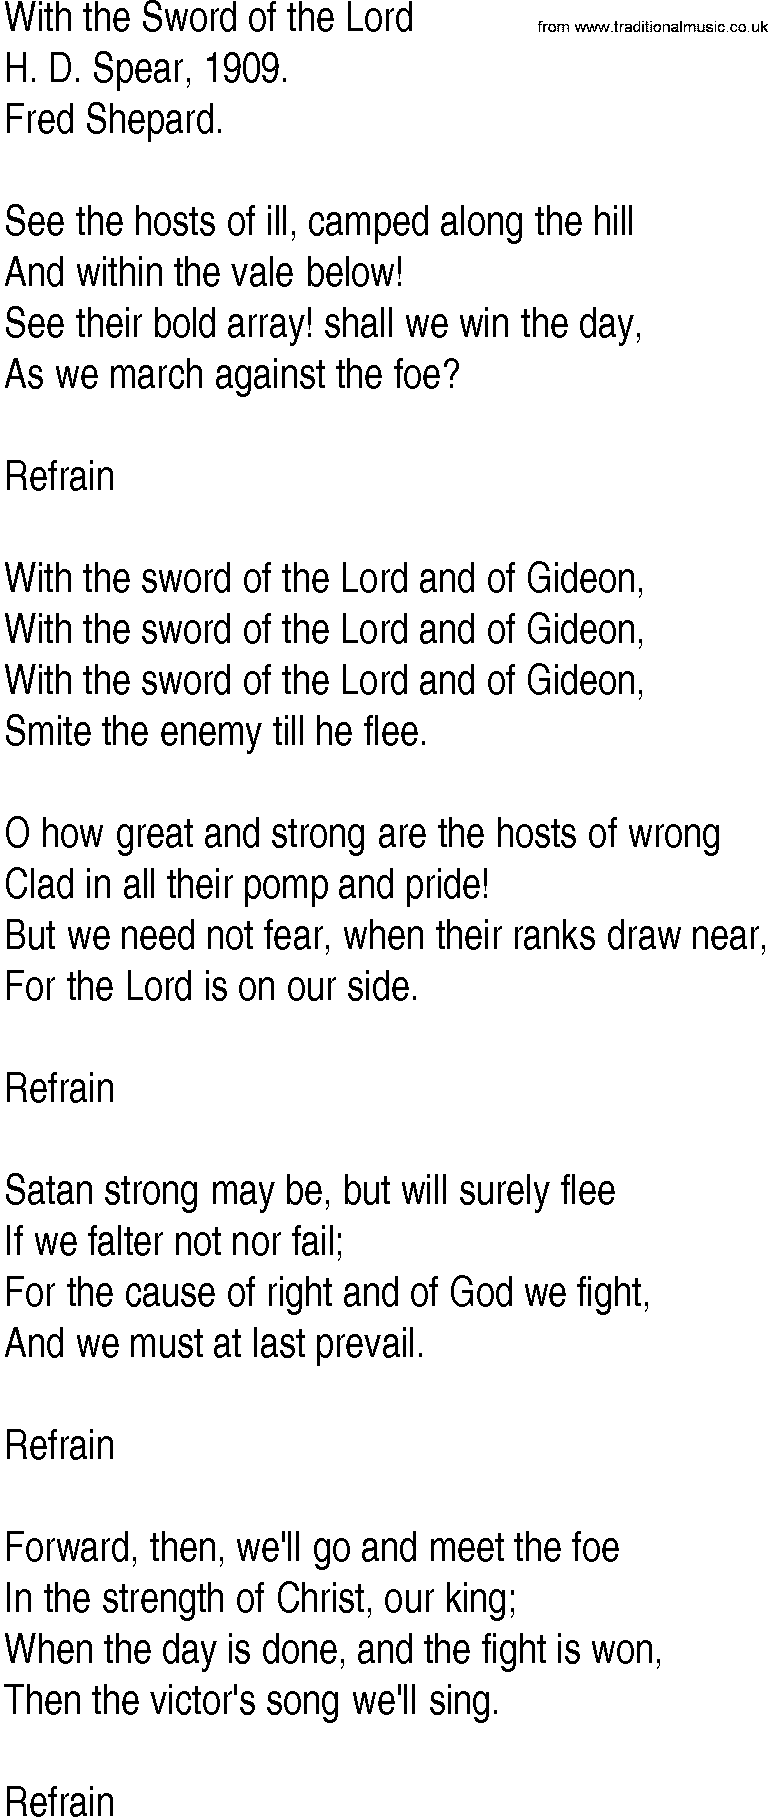 Hymn and Gospel Song: With the Sword of the Lord by H D Spear lyrics